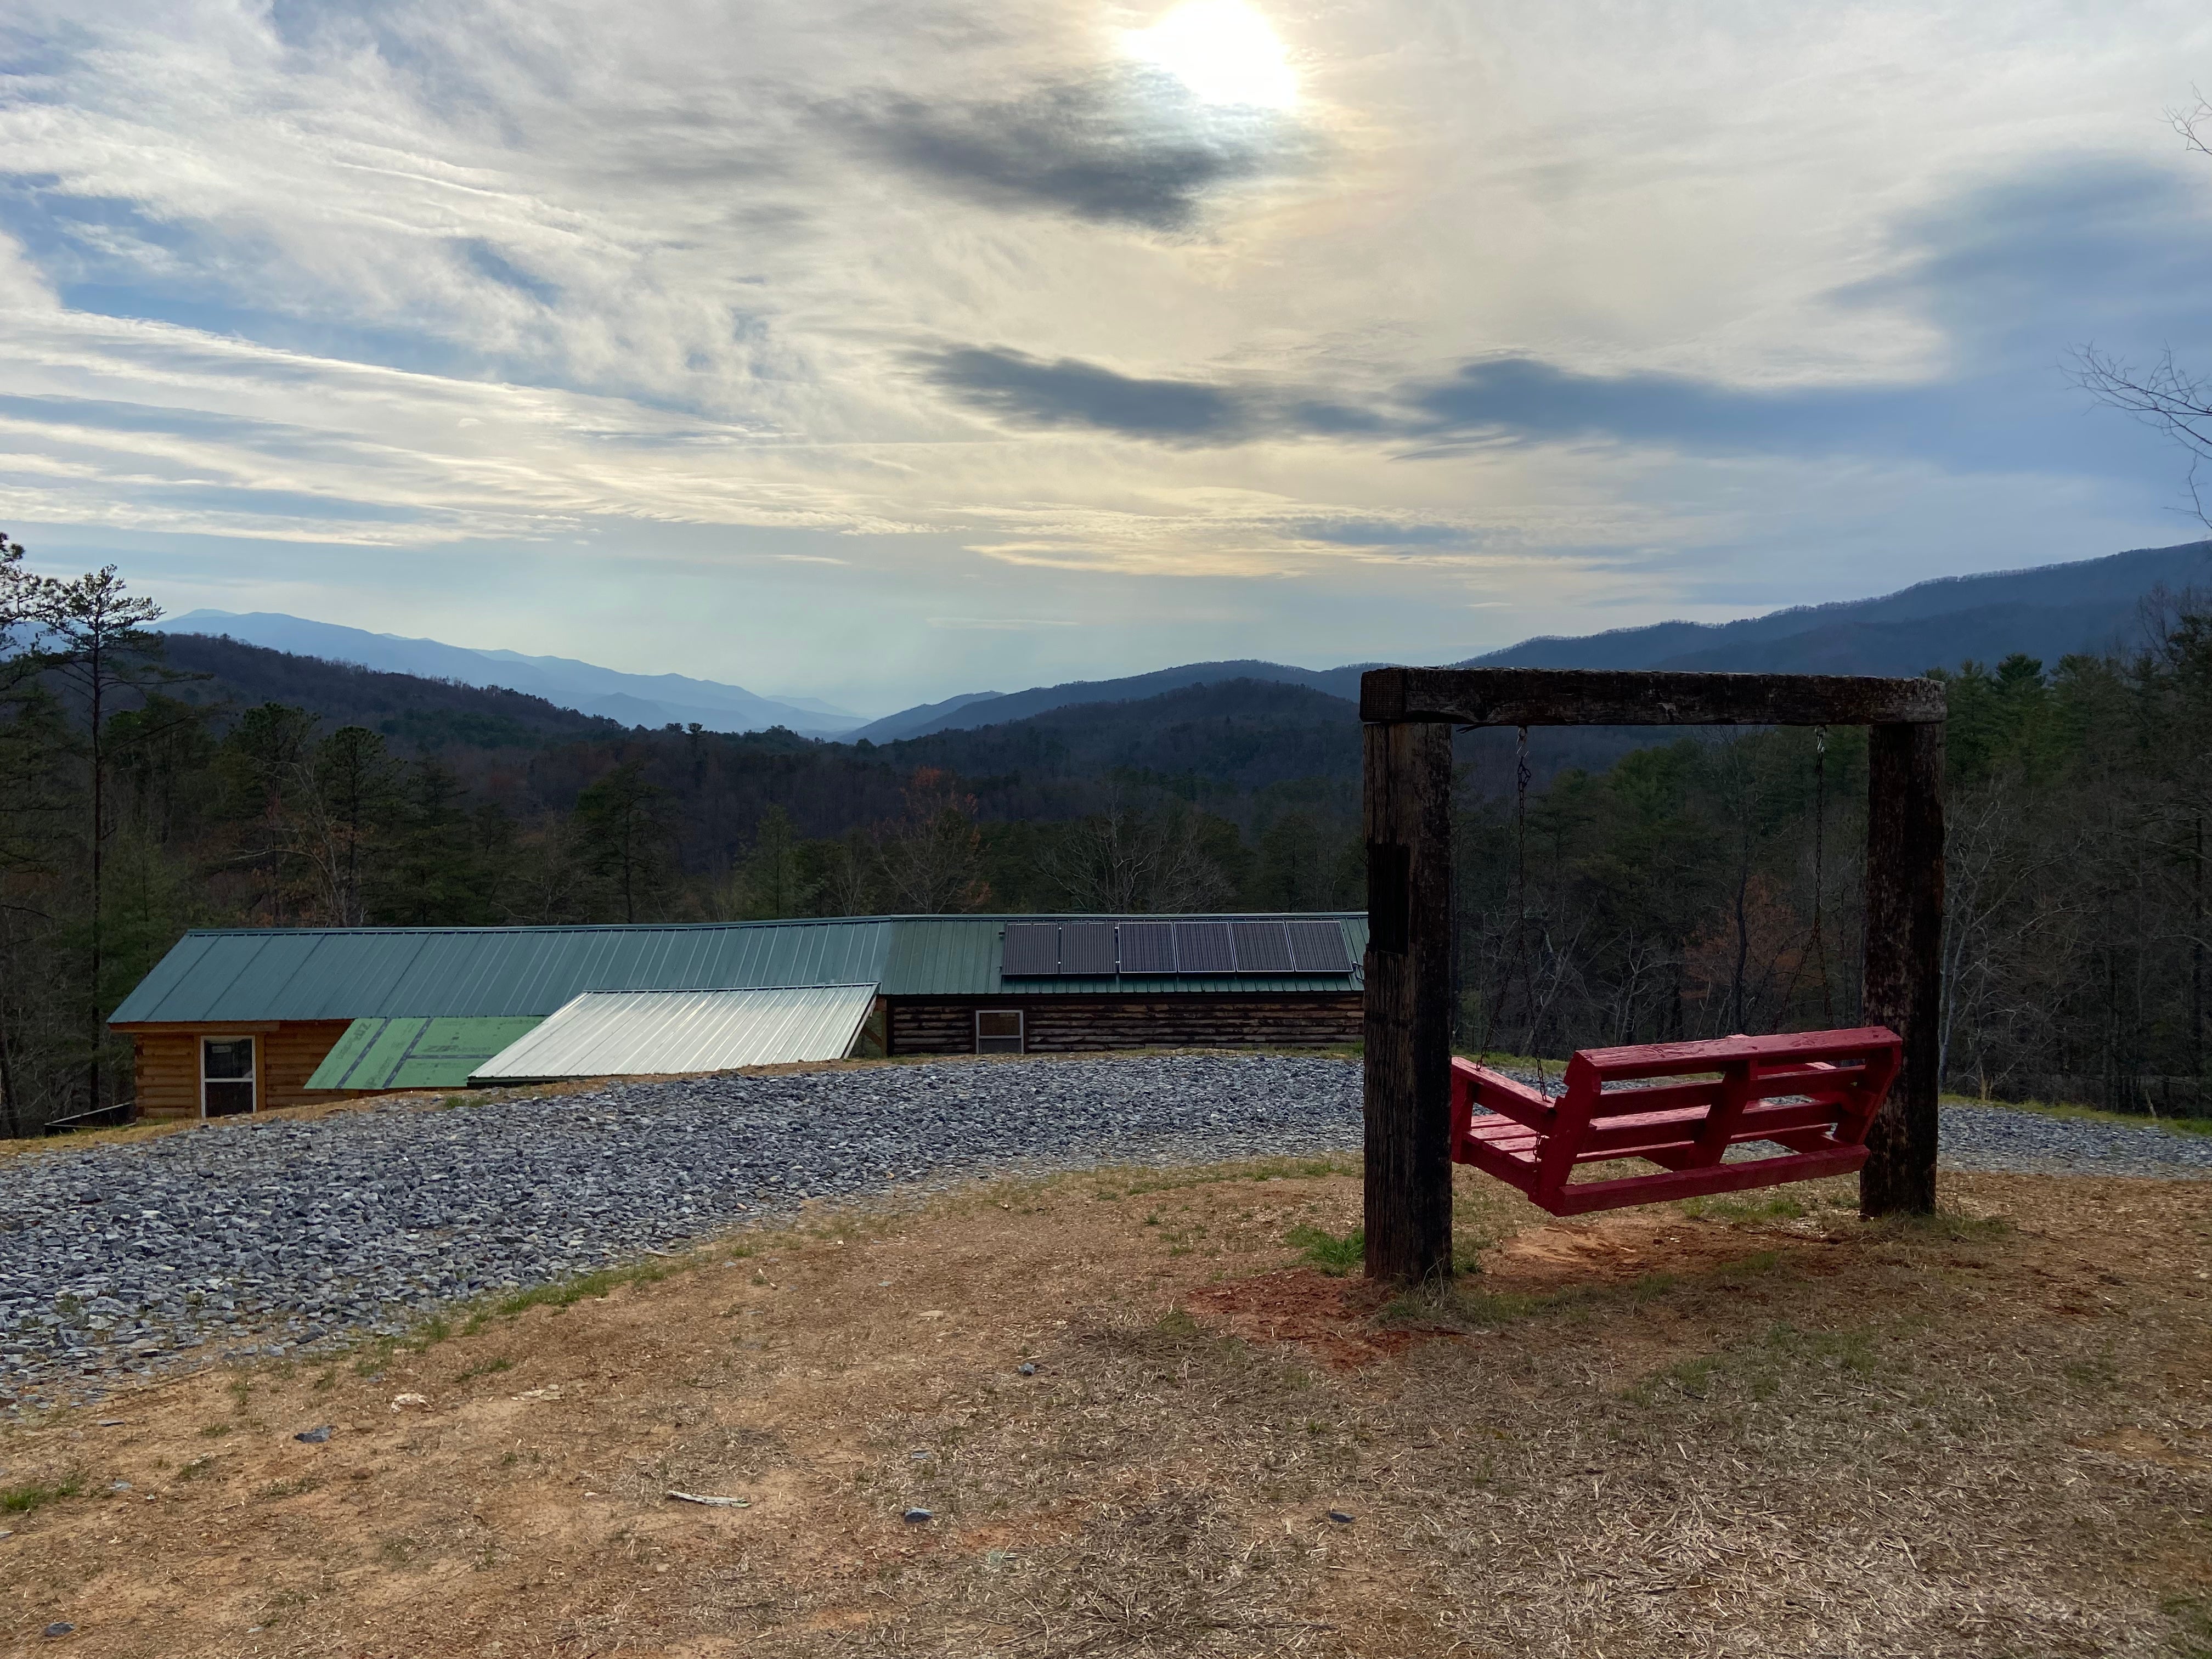 Camper submitted image from Sunset Ridge in the Smoky Mountains - 3